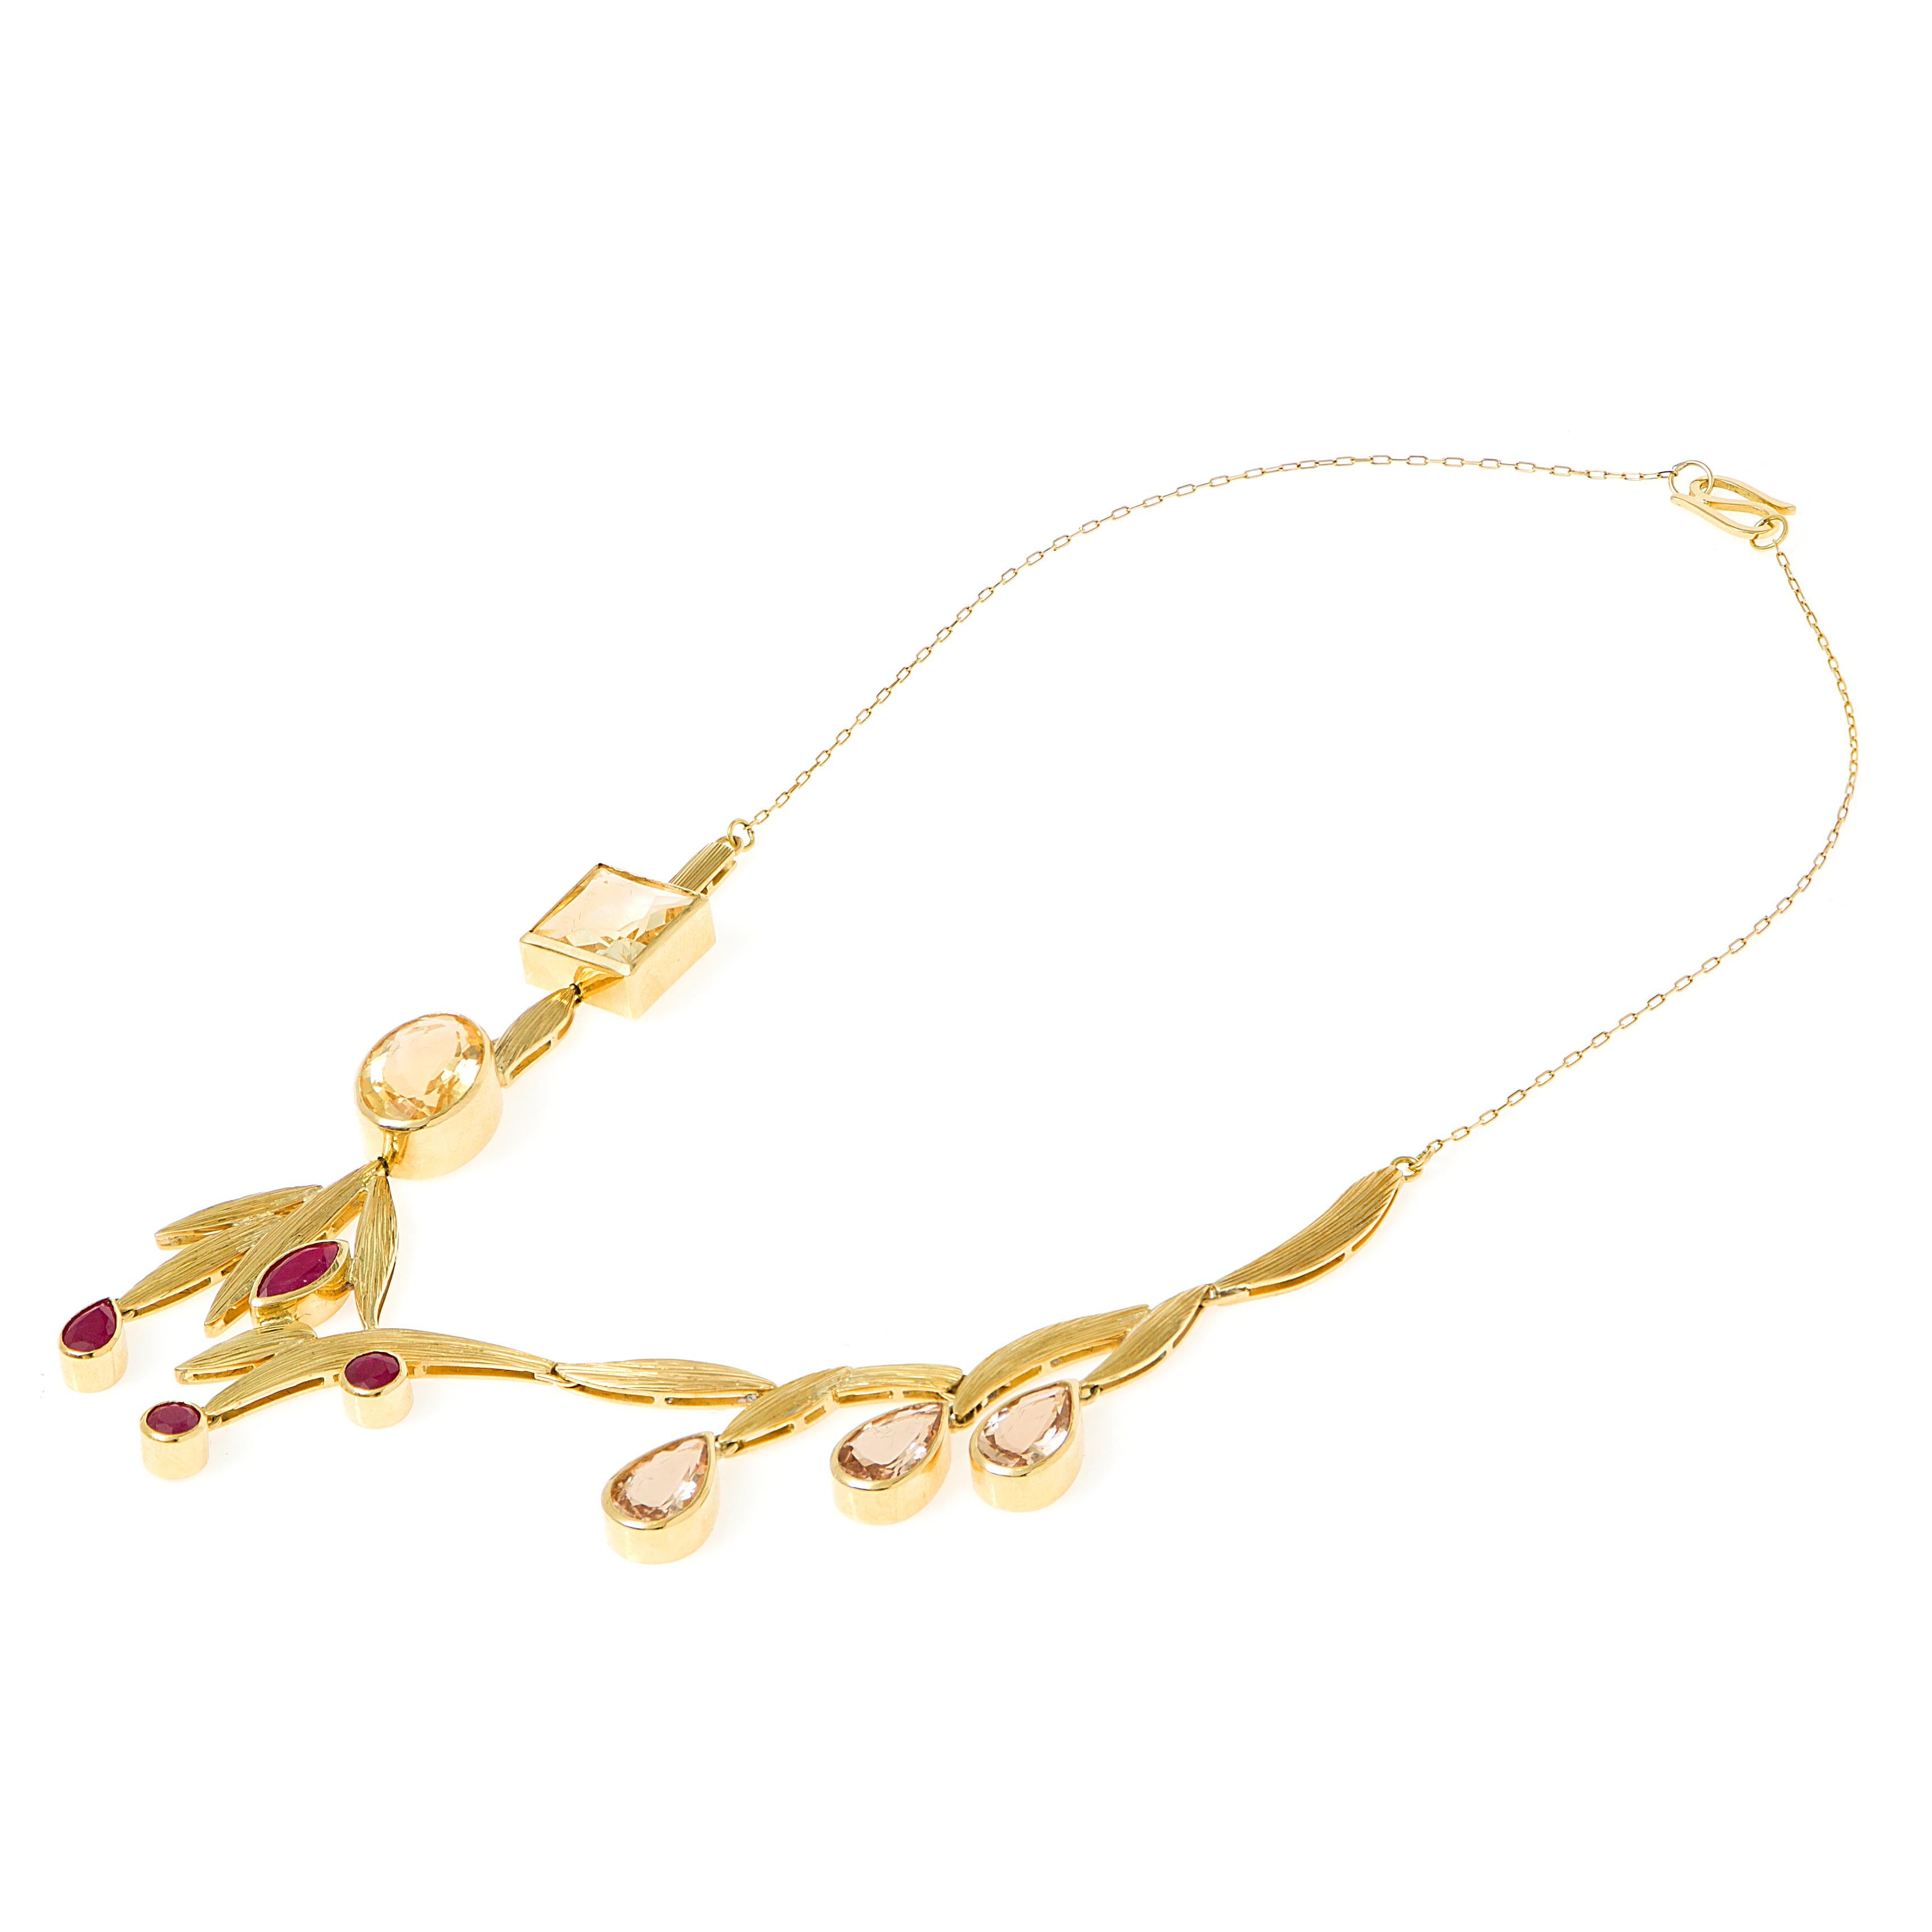 Necklace
Gold 18K
Citrine, Ruby and Morganite
Handmade, matte finish and bezel setting

First Place MJSA Vision Awards Winner 2020
Iron A' Design Award Winner 2020-2021

The diversity of the flowers is represented in the gemstones’ different hues